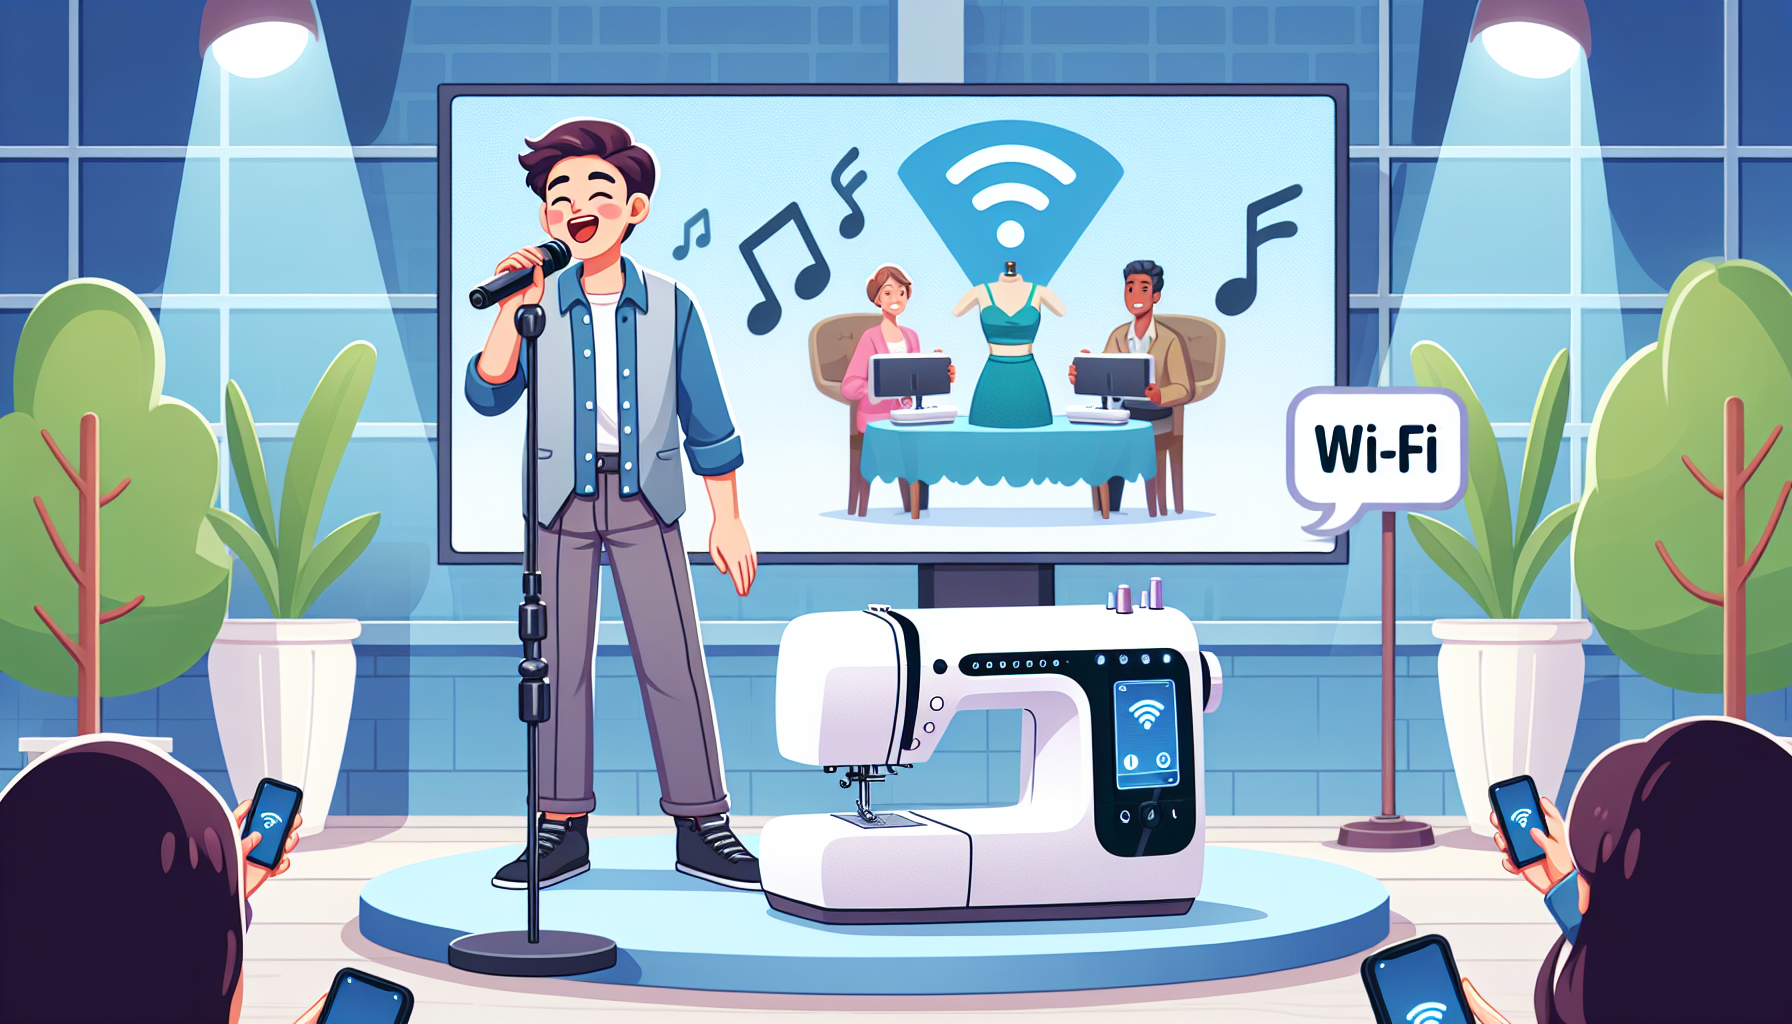 Wireless Sewing Revolution: Singer Launches WiFi-Enabled Sewing Machine - Watch the Video Now!